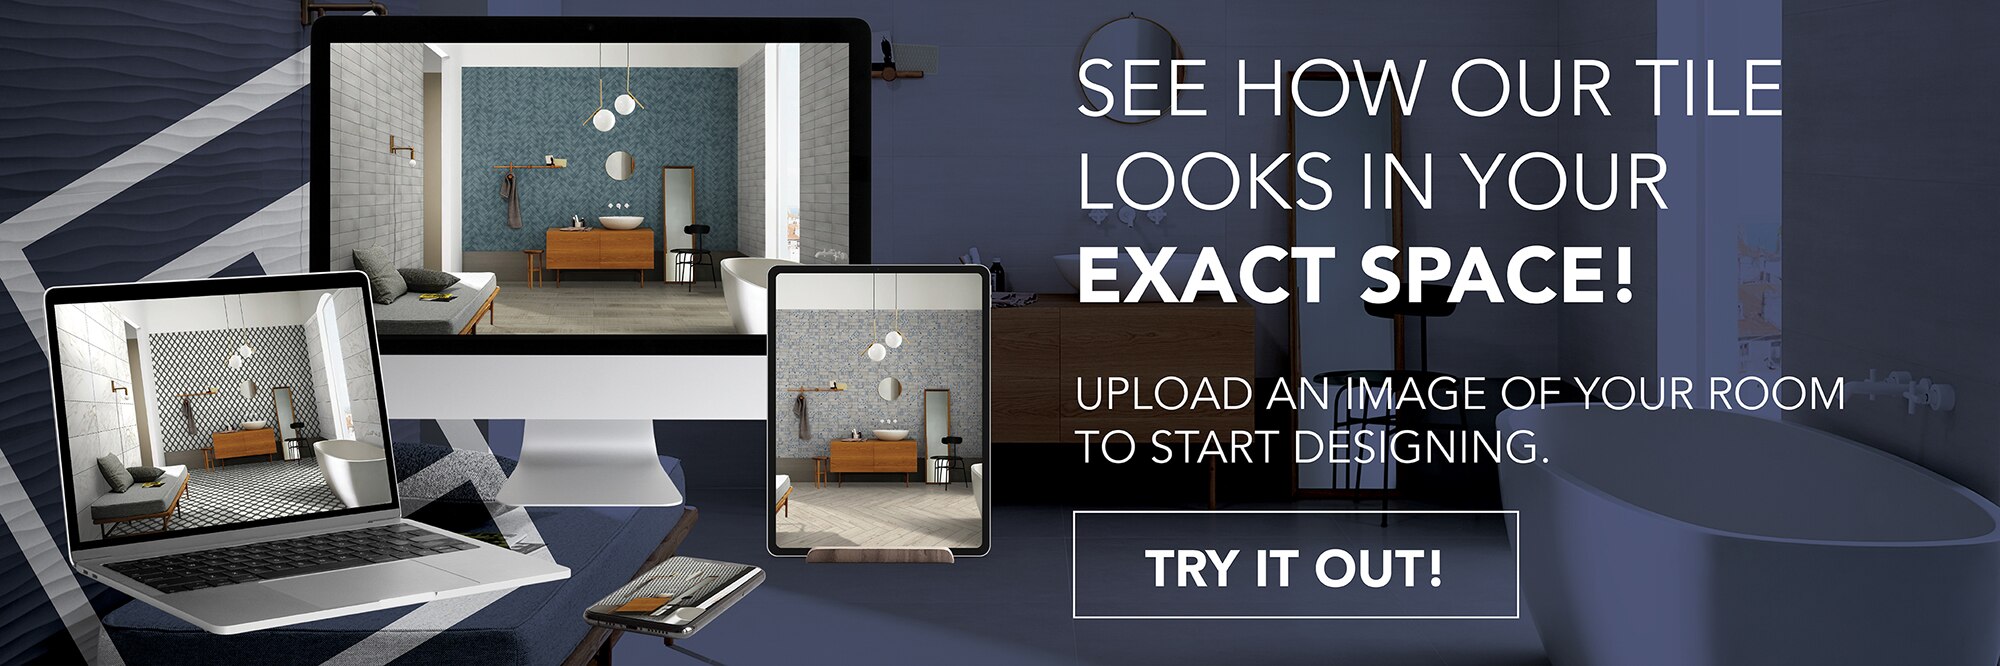 See how our tile looks in your exact space! Upload an images of your room to start designing. Try it out!